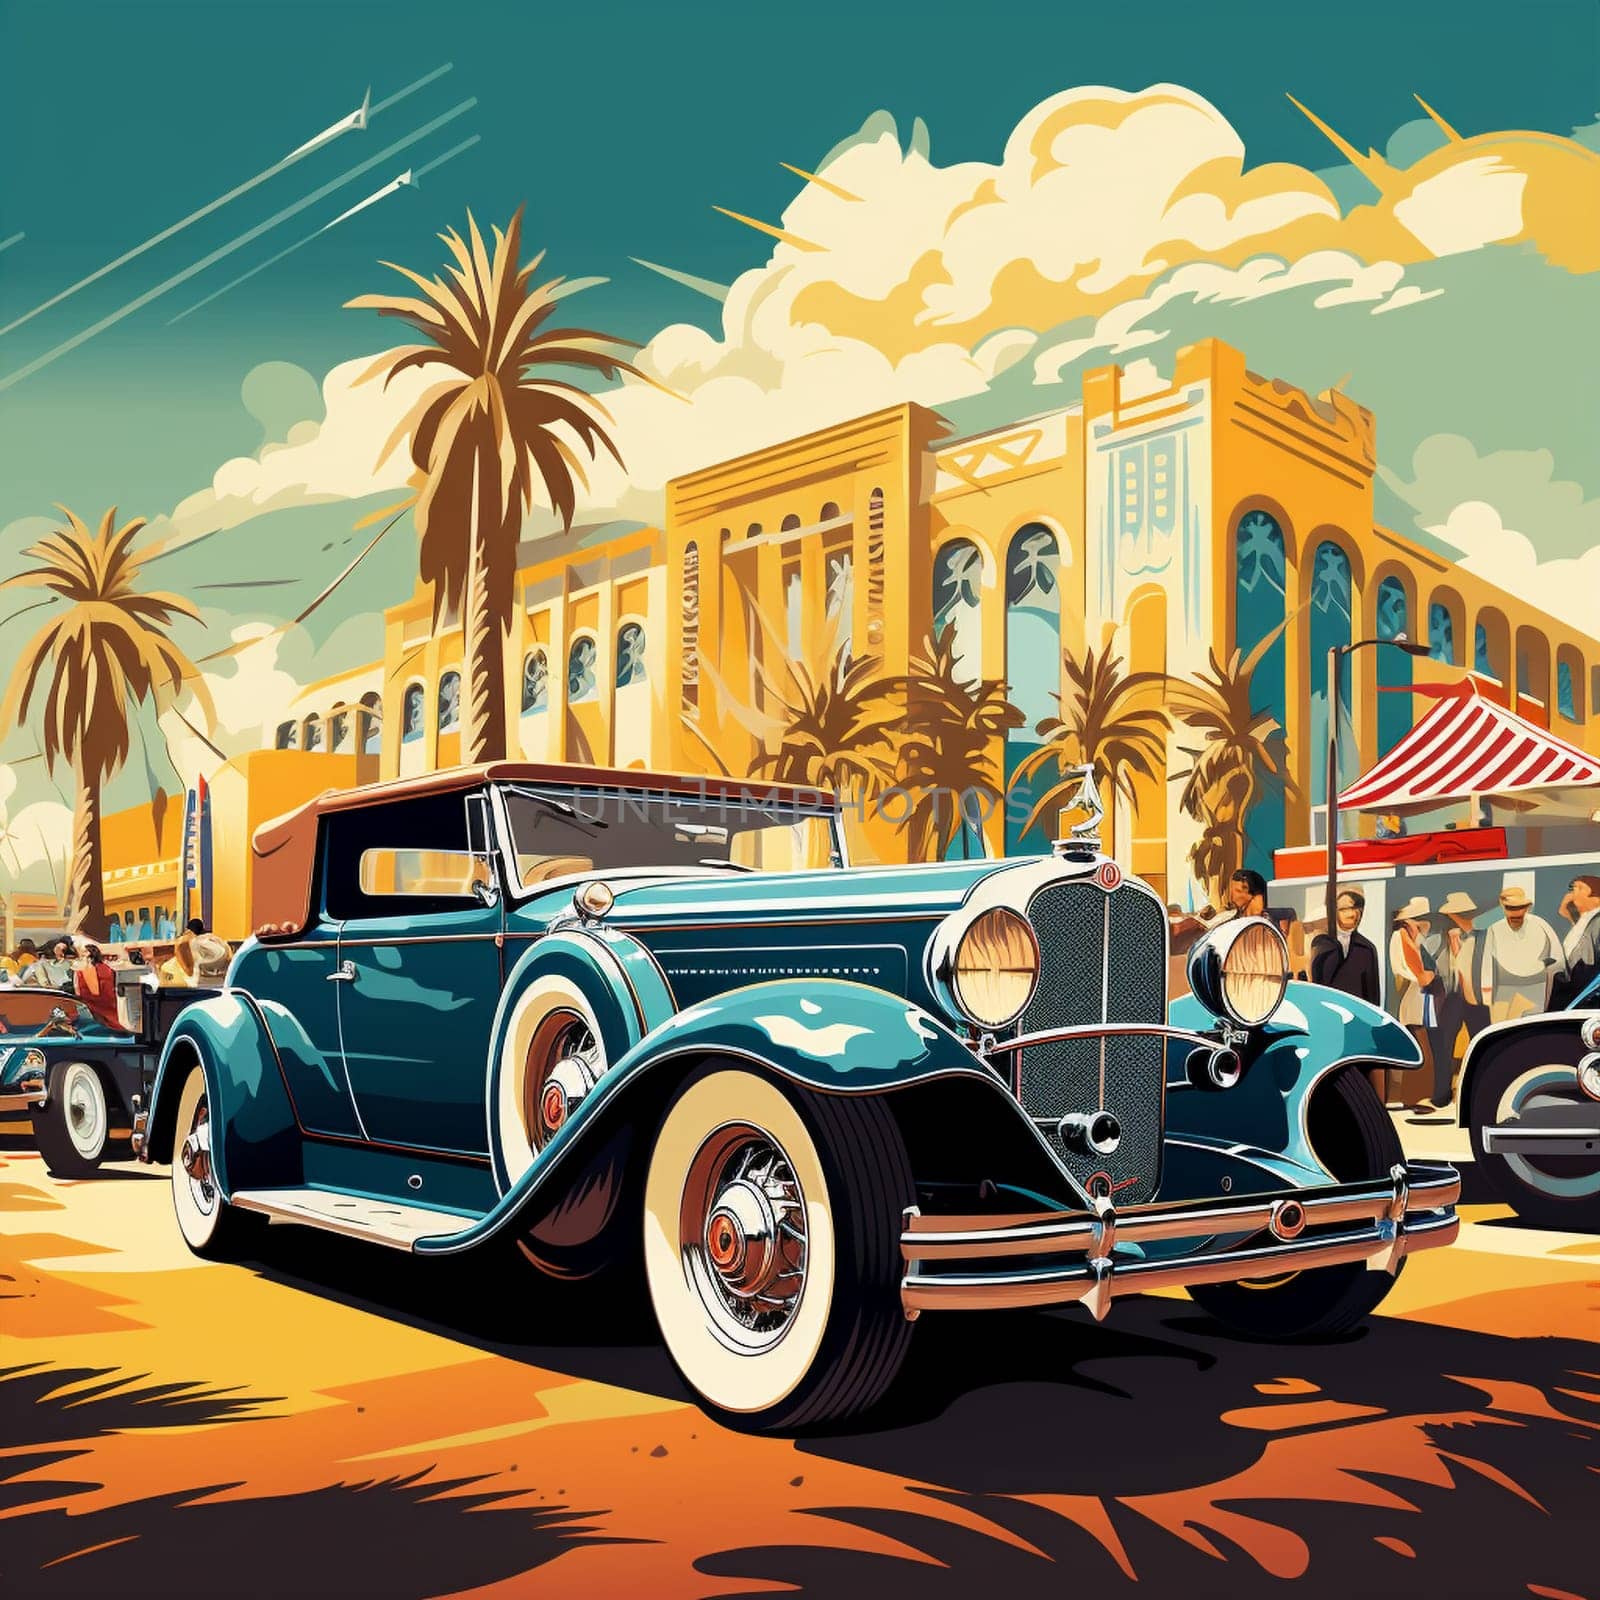 Driving Into History: Vintage Car Exhibition by Sahin